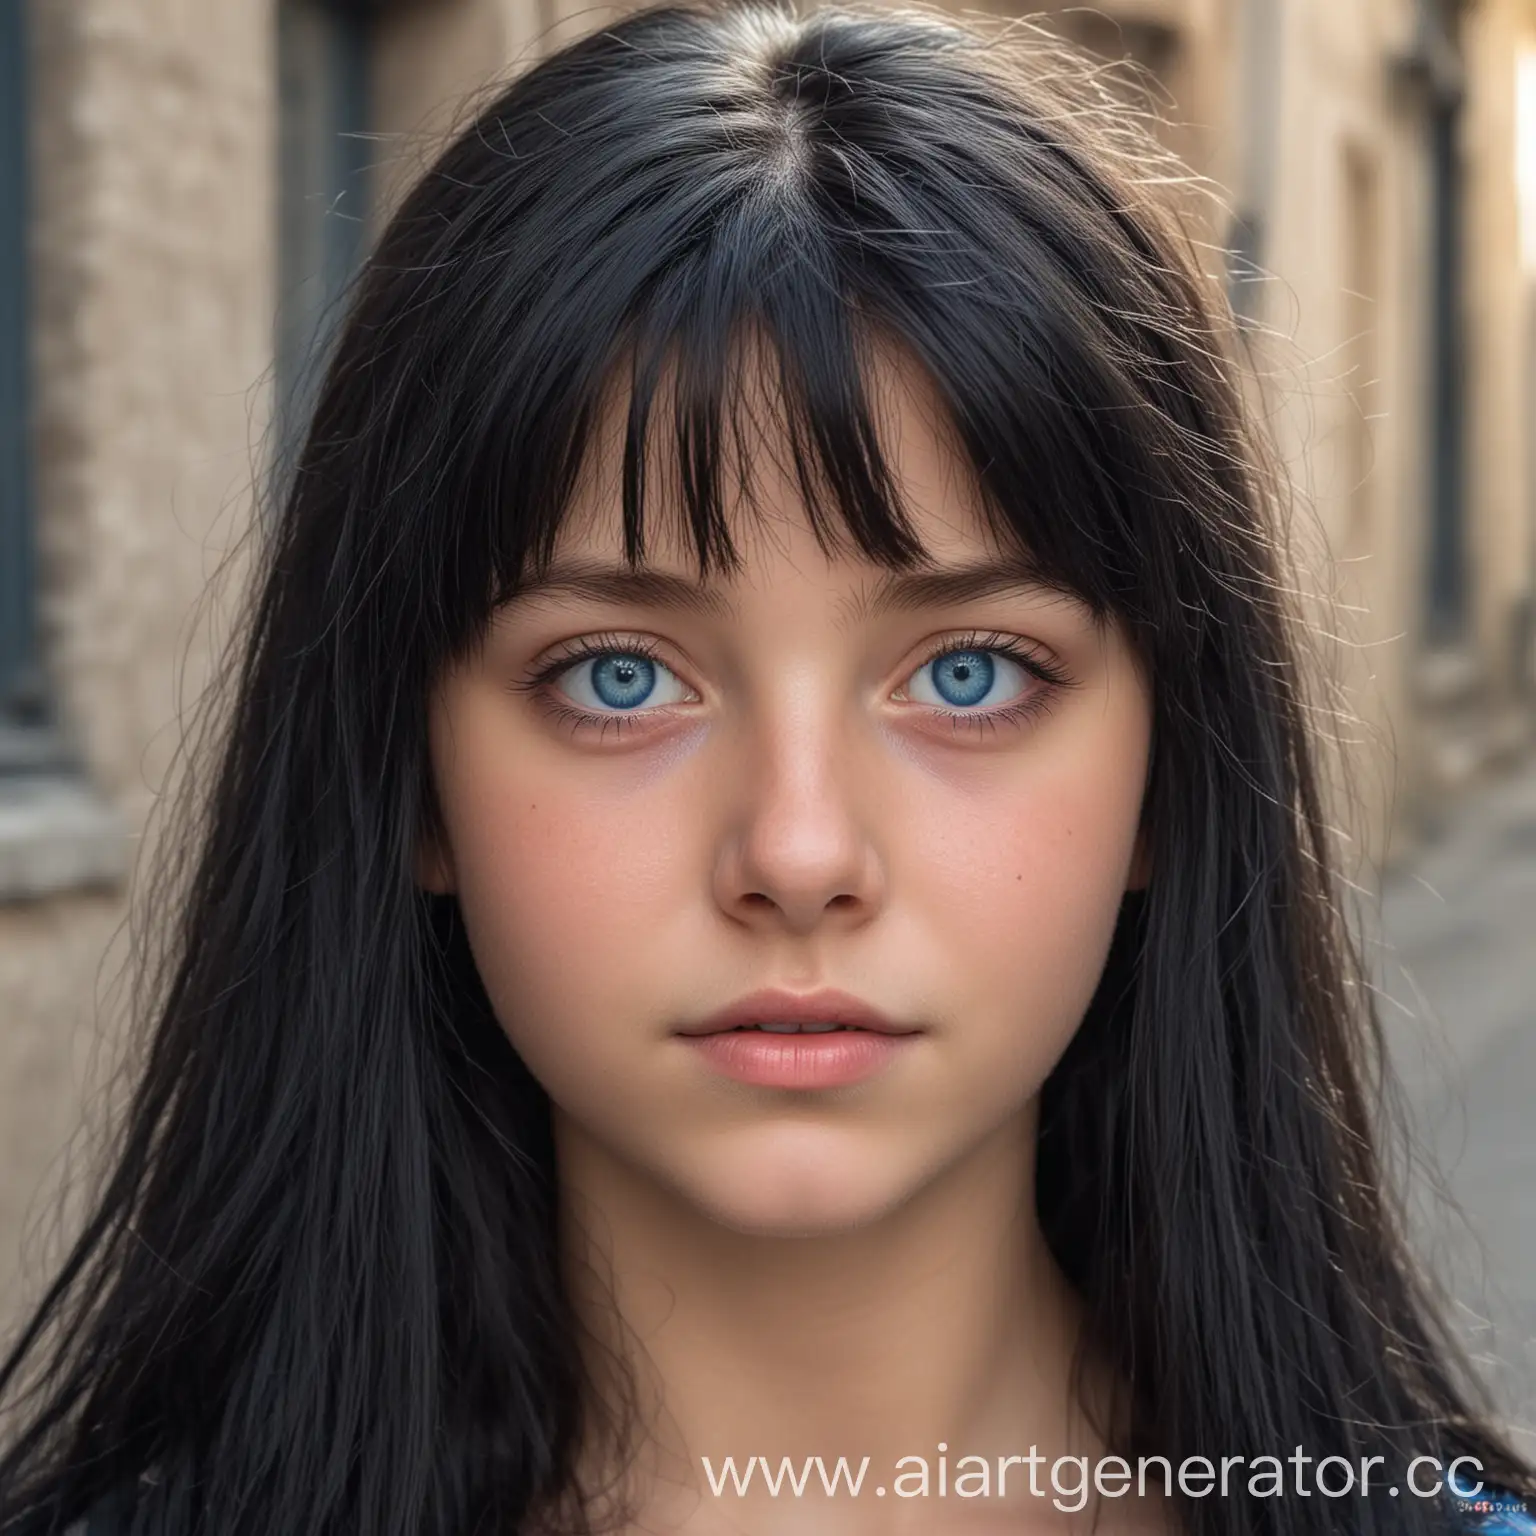 black-haired girl 17 years old blue eyes in street 